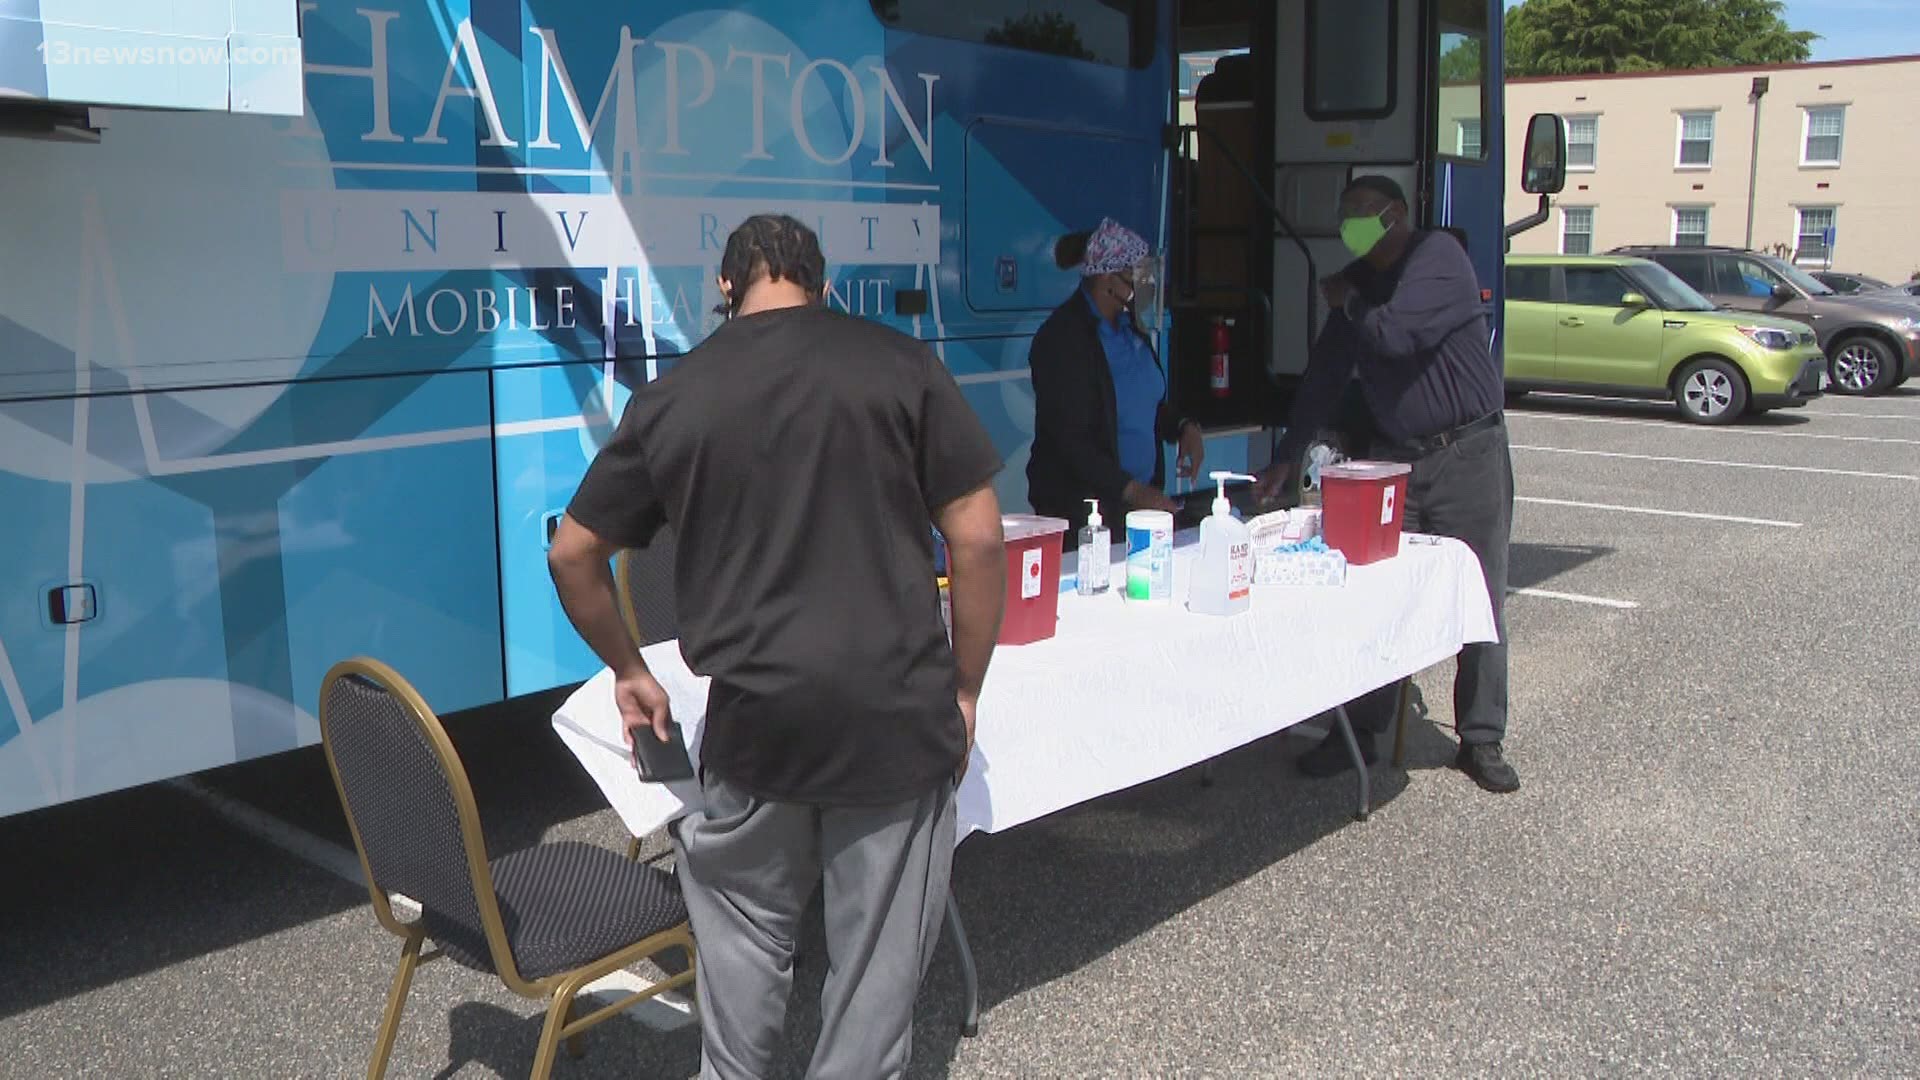 Hampton University has established a mobile vaccination center on its campus to make vaccinations easier for faculty. 13News Now Connor Rhiel has more.